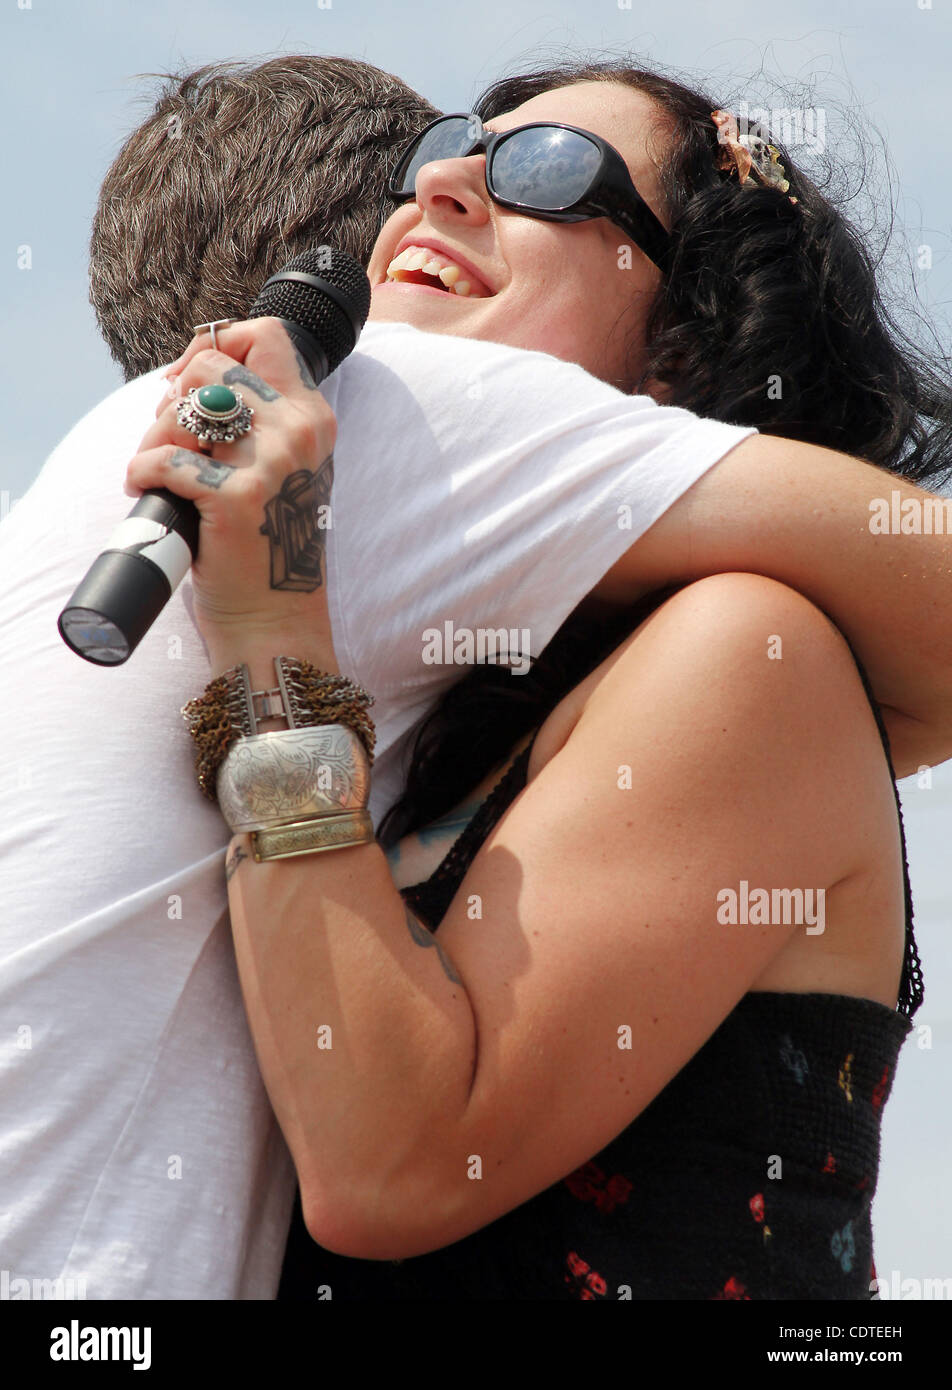 Mike Wolfe, left and Danielle Colby Cushman, two of the three stars on The History Channel's 'American Pickers,' laugh and hug during an appearance Saturday June 4, 2011 at the 'American Pickers' Weekend that brought an estimated 10,000 people to LeClaire, Iowa. Co-star Frank Fritz did not attend th Stock Photo